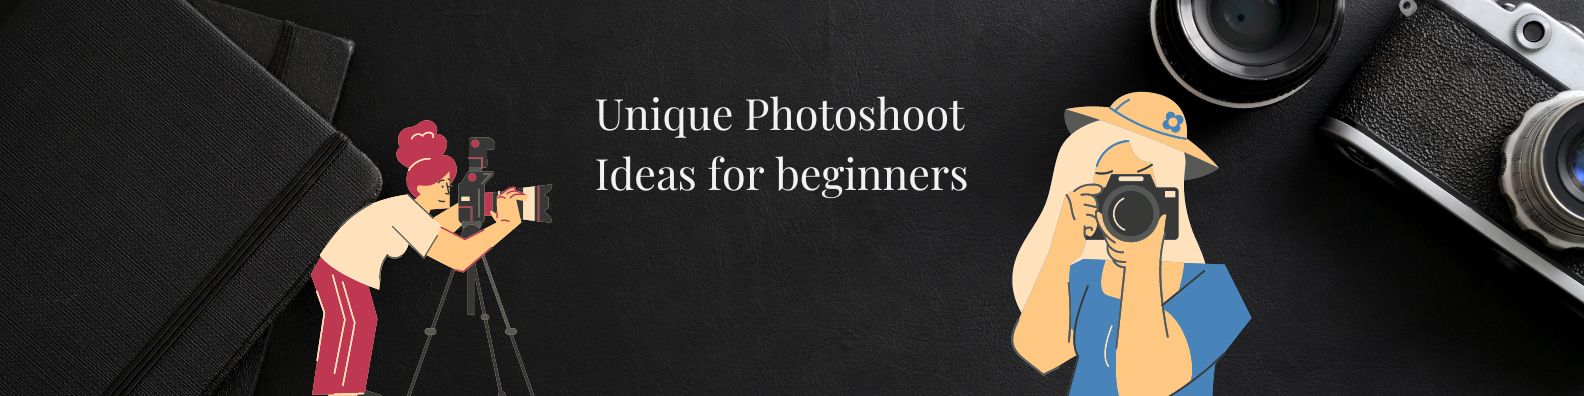 Unique Photoshoot Ideas for beginners